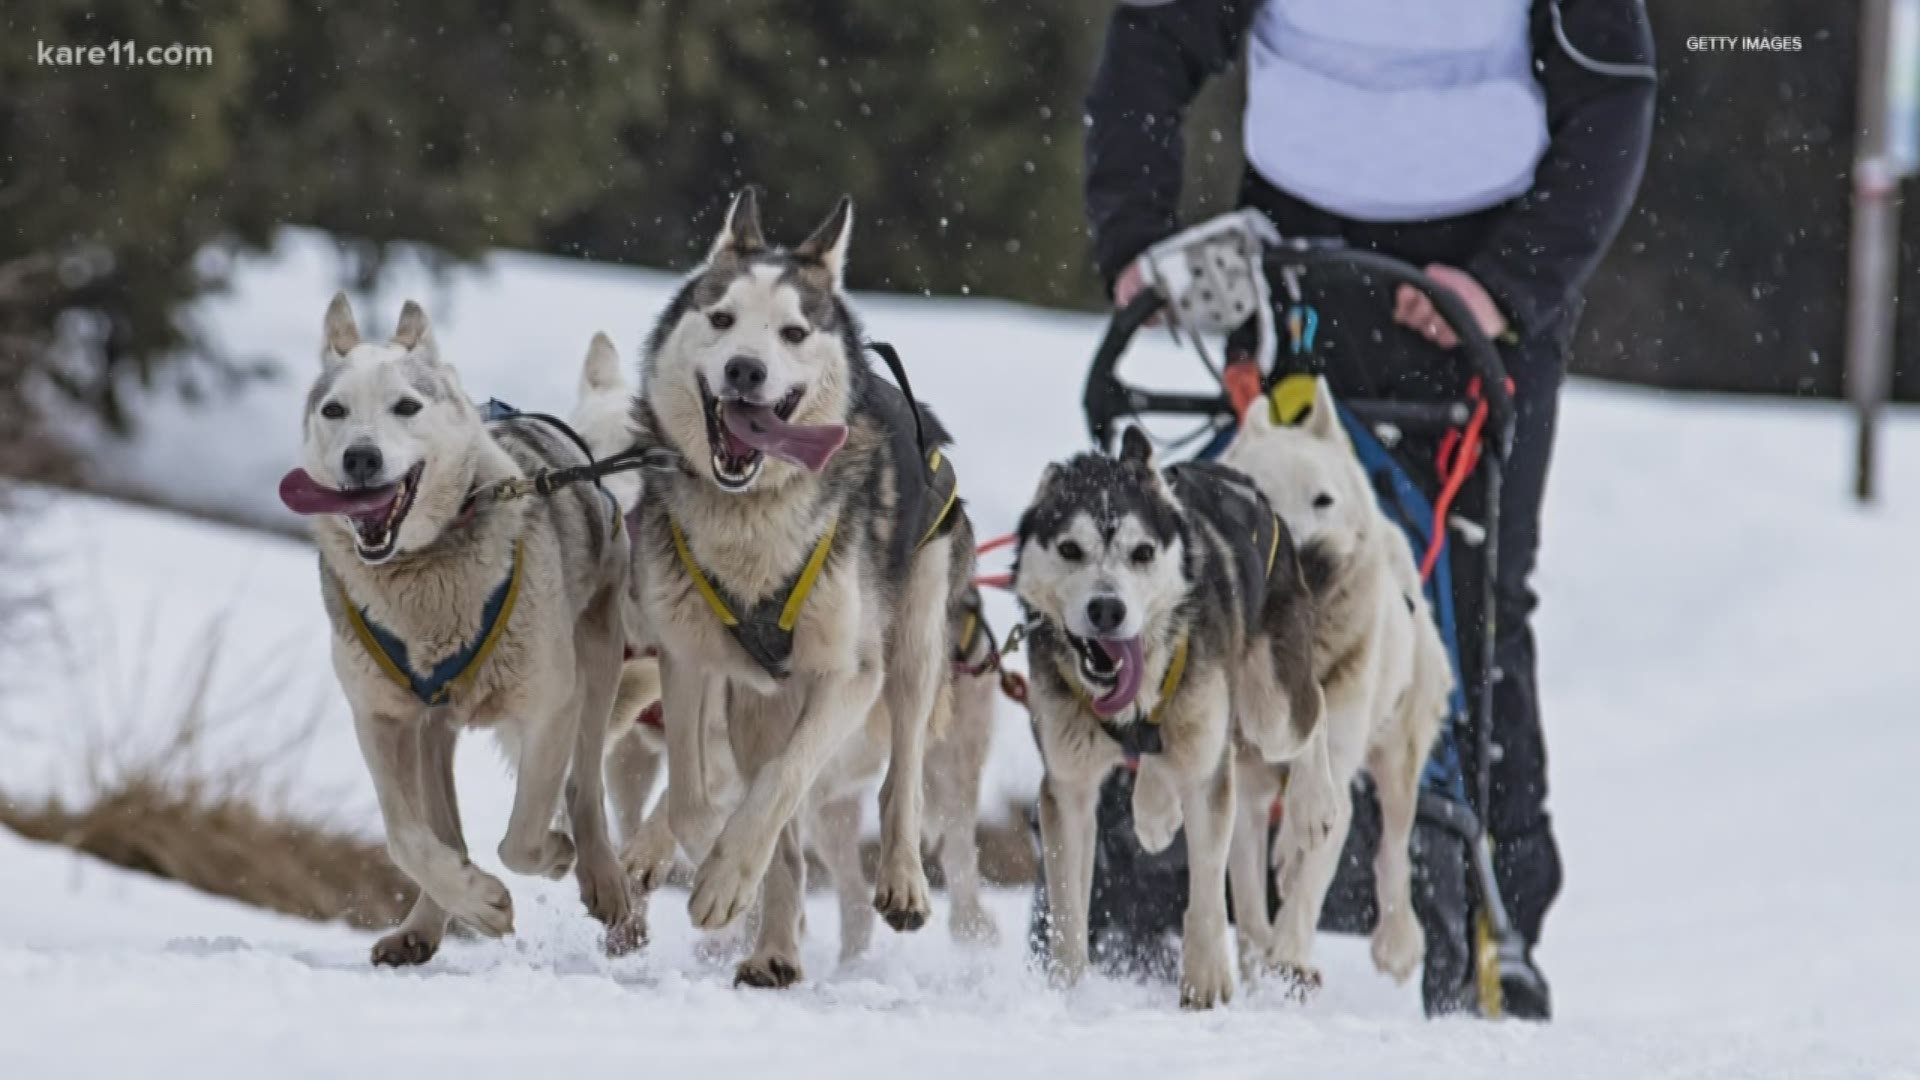 The Lake Minnetonka Klondike Dog Derby Race Director fills us in on sled dog racing ahead of Sunday's race in Excelsior.